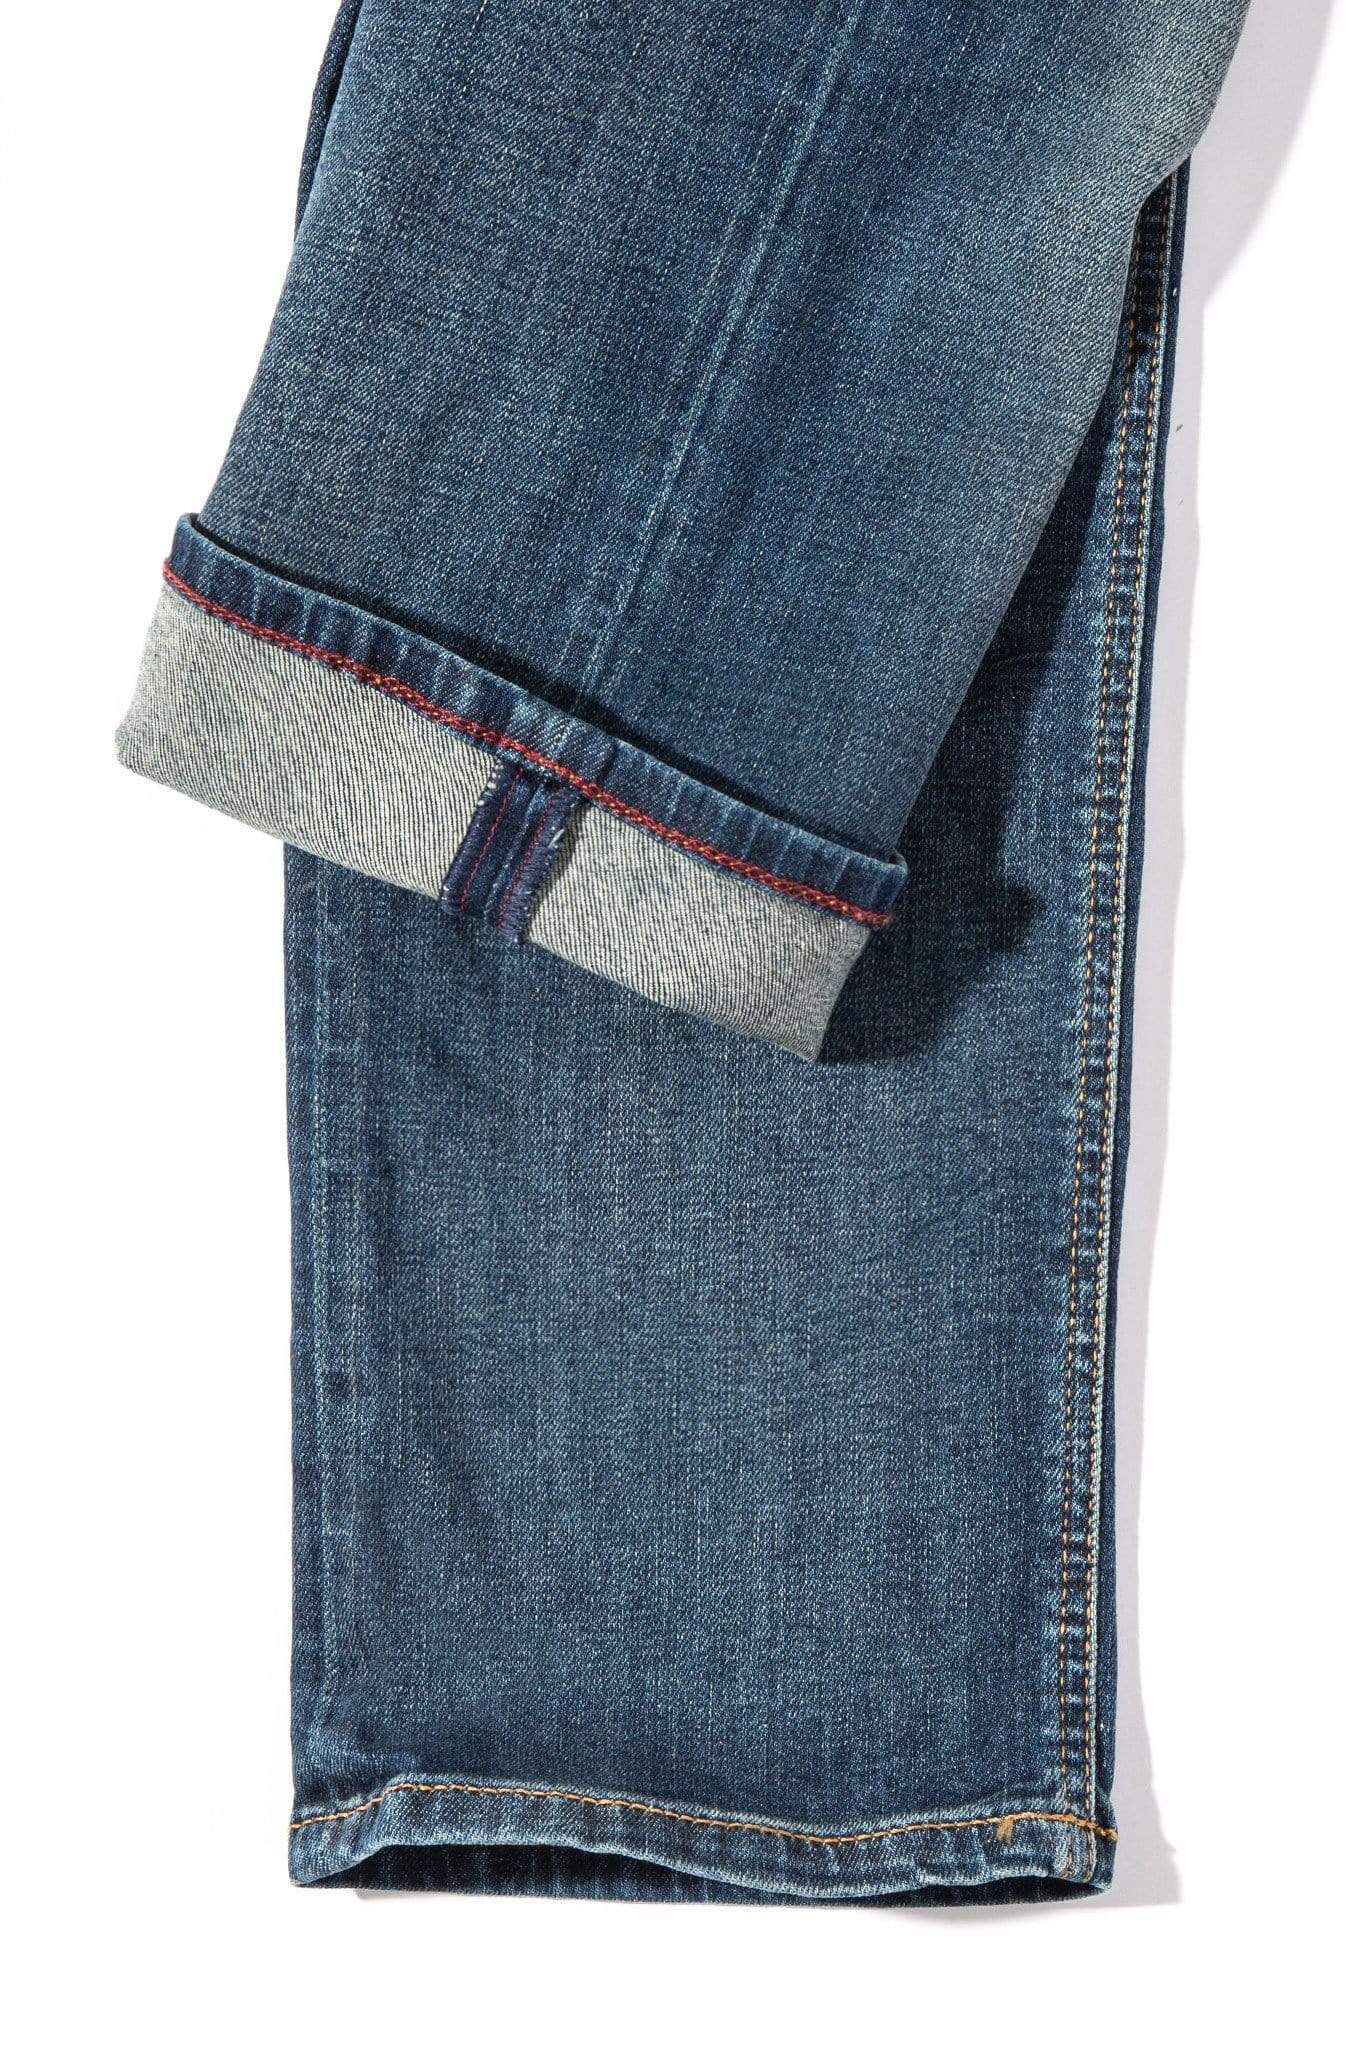 MAC Arne Pipe Jeans in Original Blue Extreme Wash - AXEL'S